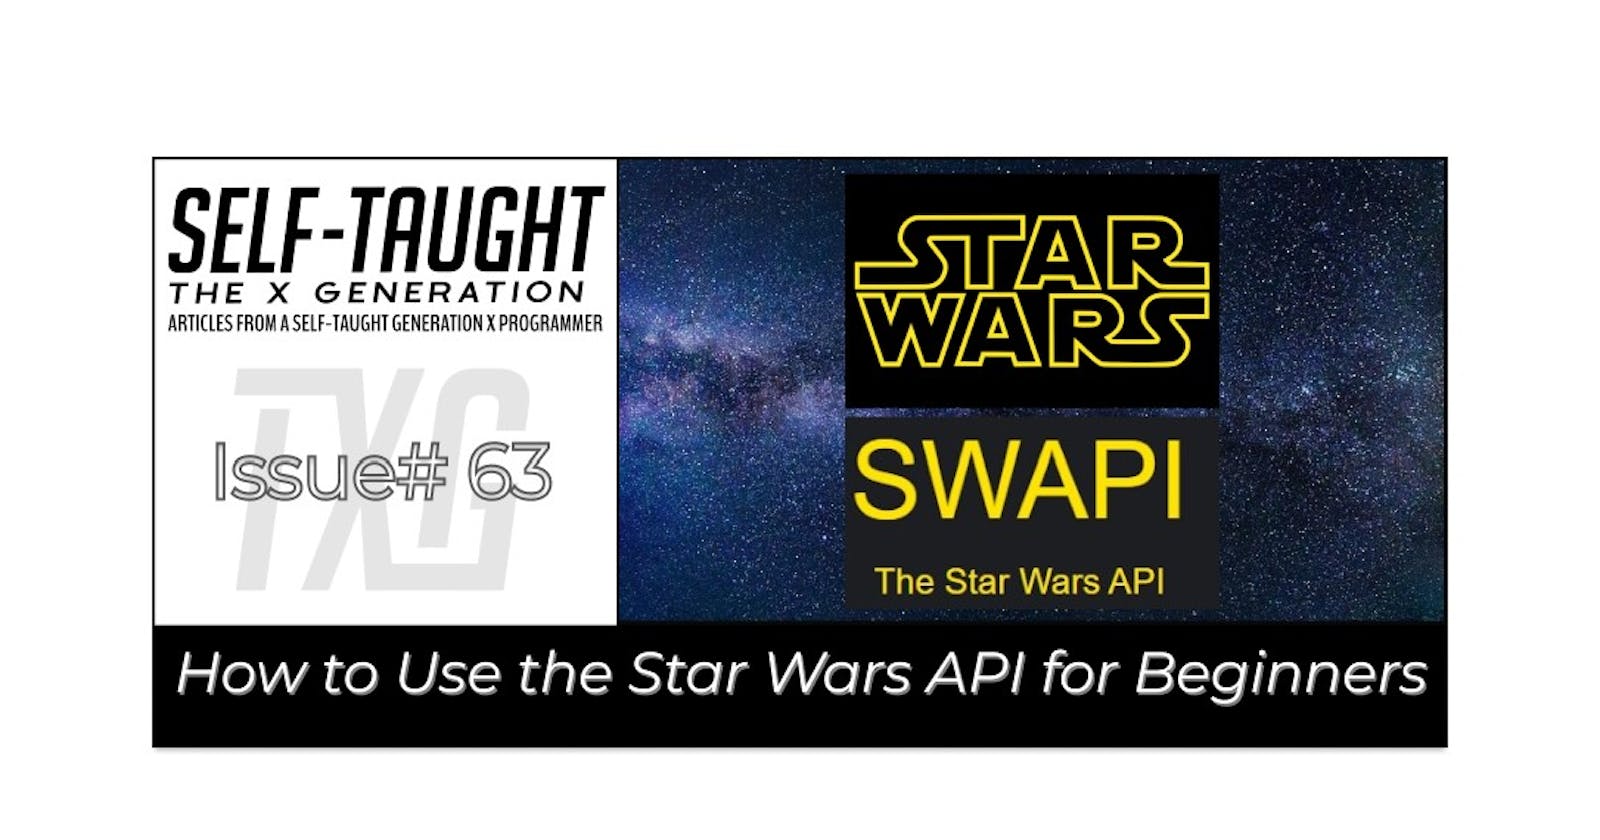 JavaScript: How to Use the Star Wars API for Beginners